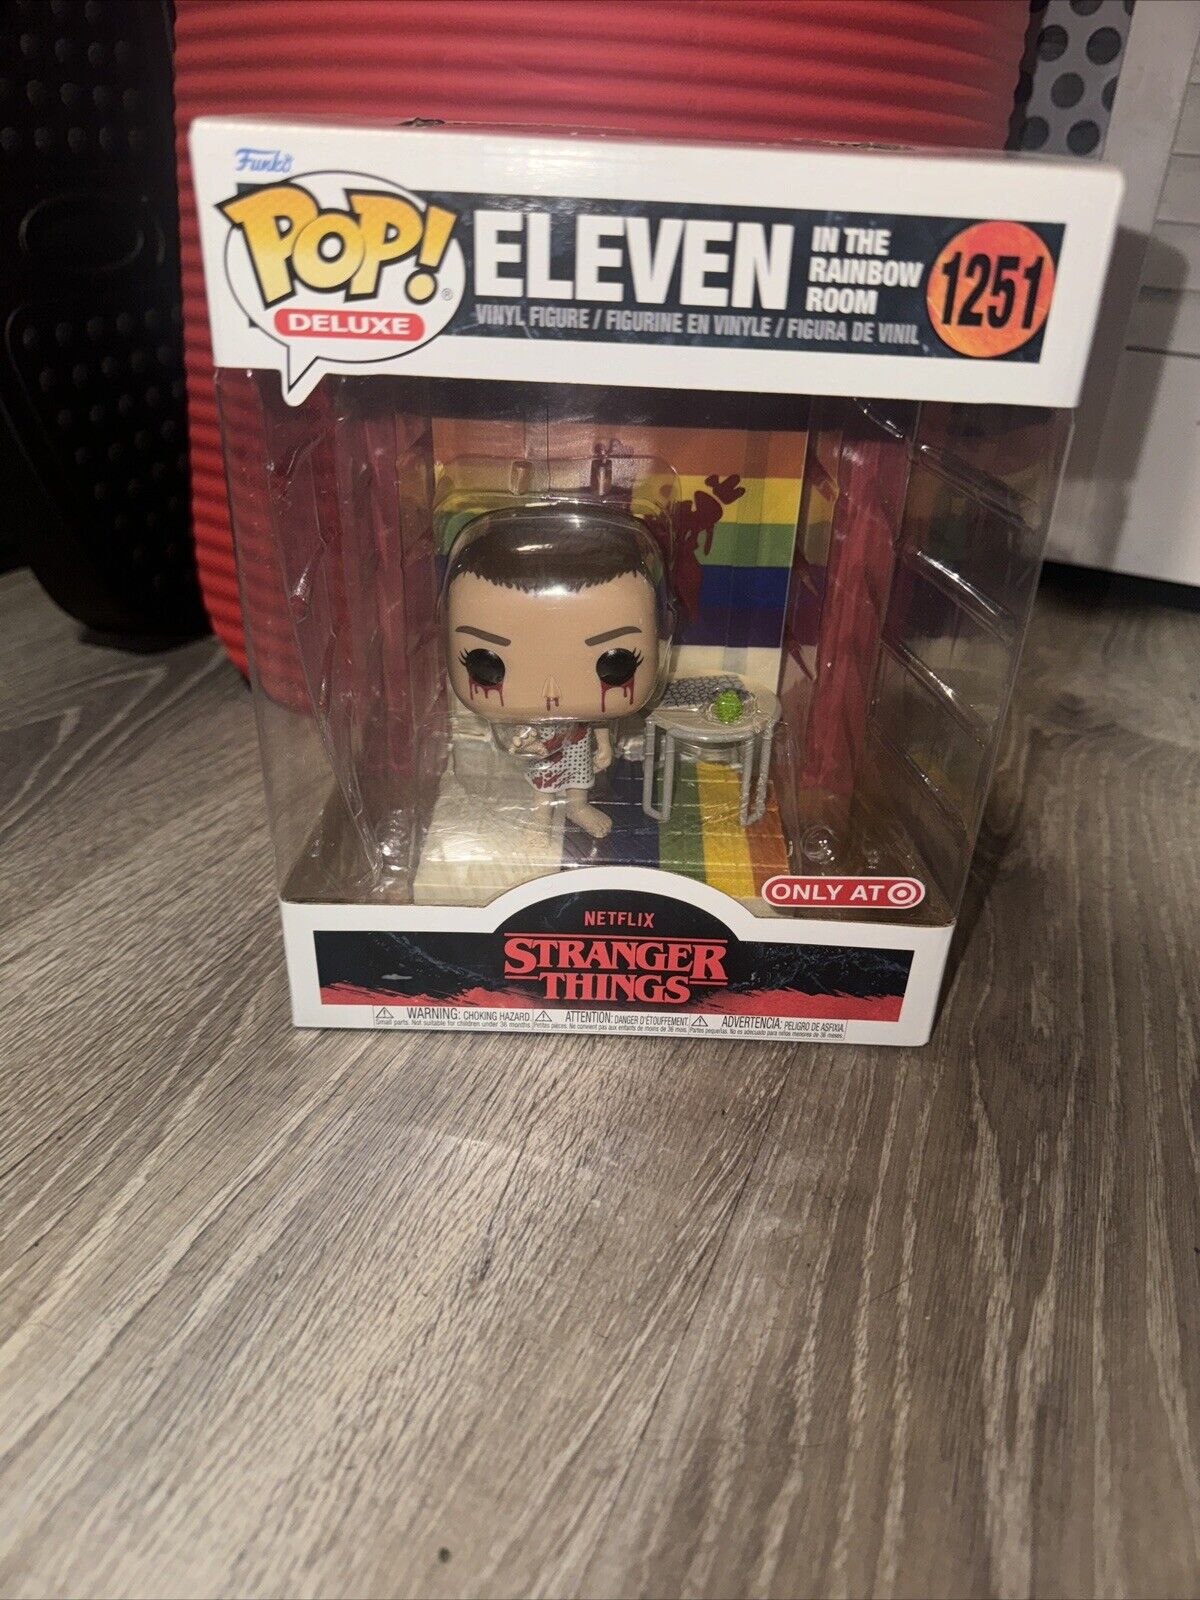 Funko Pop Moments: Stranger Things - Eleven in the Rainbow Room - Target